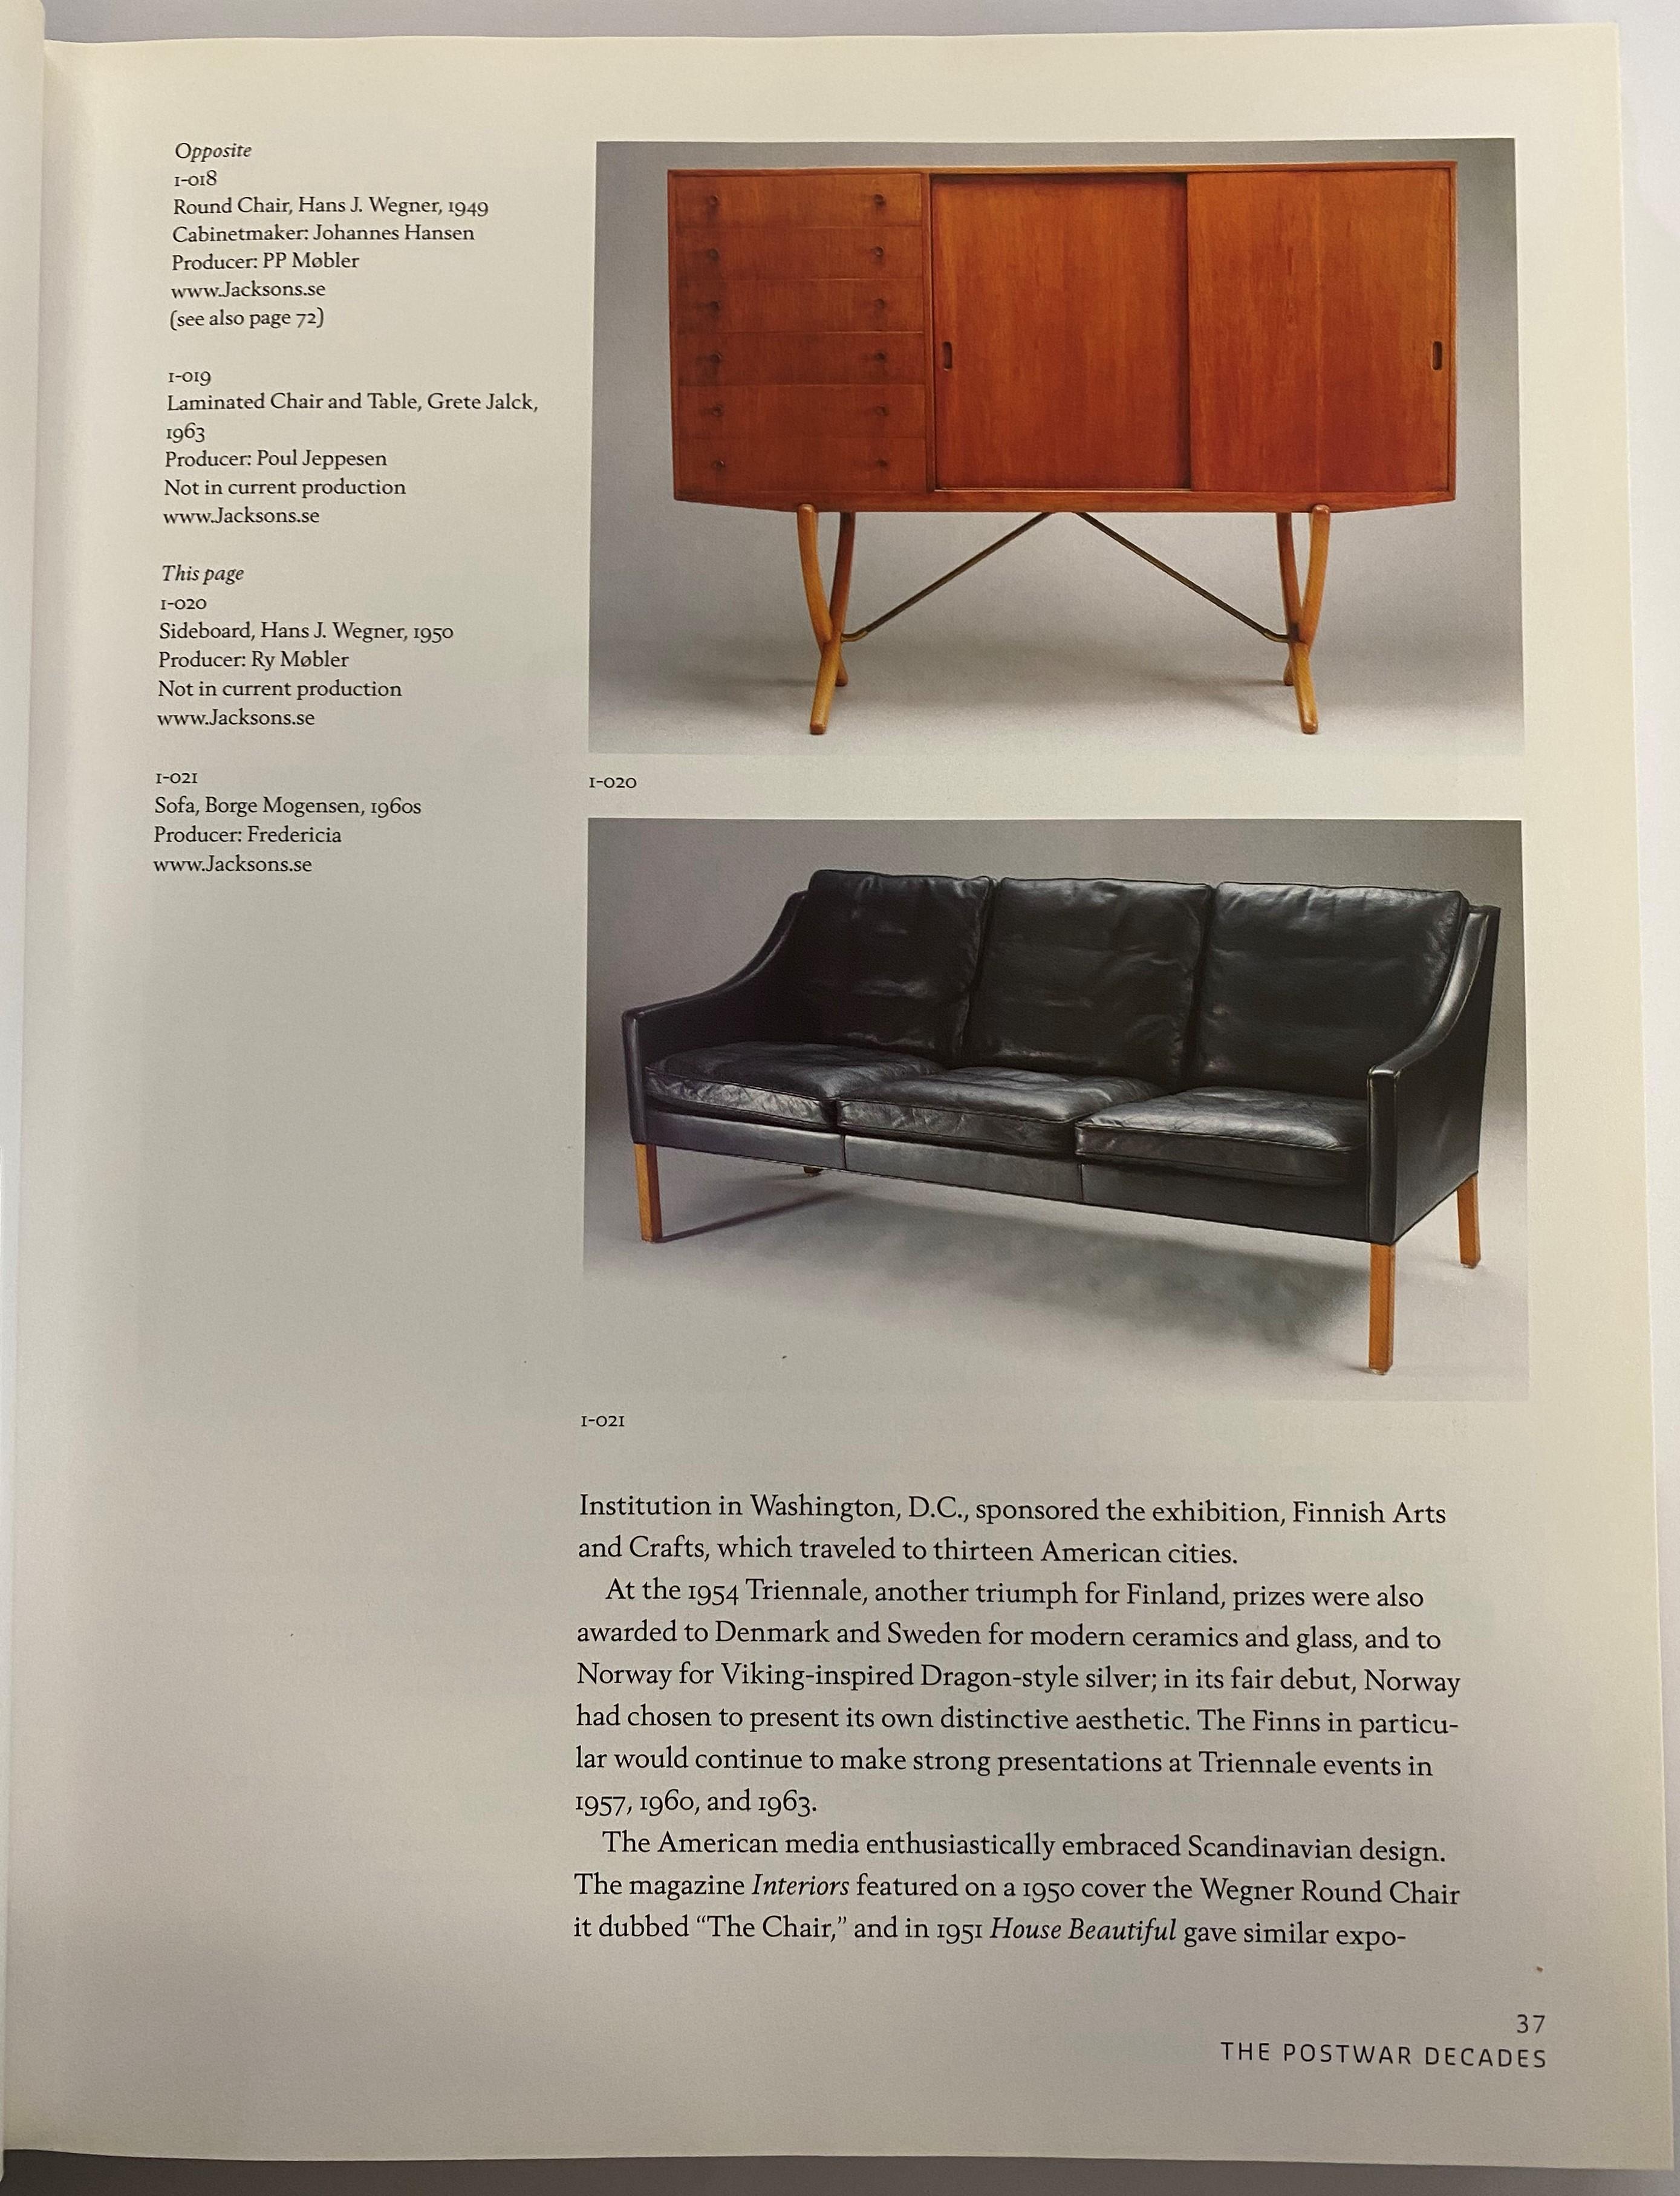 by Judith Gura. 
Today, a new generation of designers continues that tradition, creating pieces that are functional, comfortable, and visually appealing. This book, the first American summary of modern Scandinavian design in more than two decades,